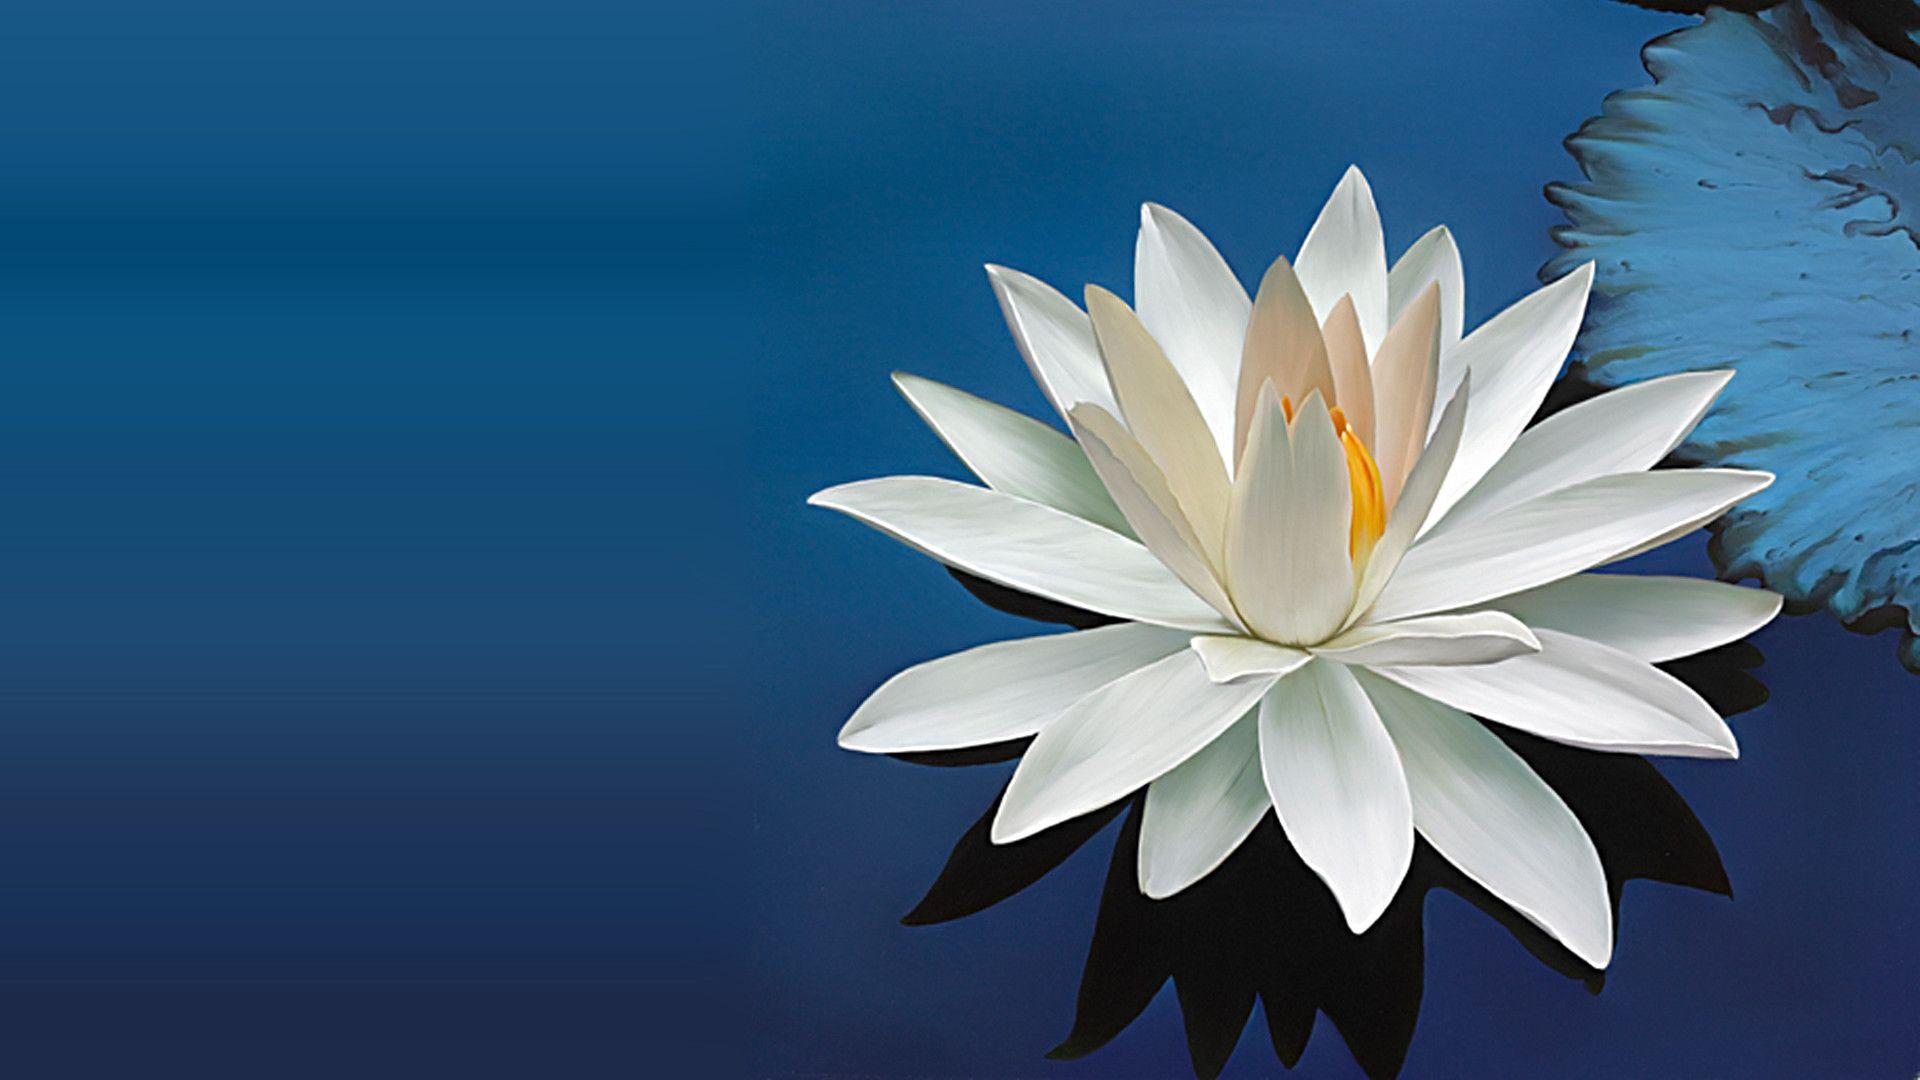 25 Choices lotus flower desktop wallpaper You Can Get It At No Cost ...